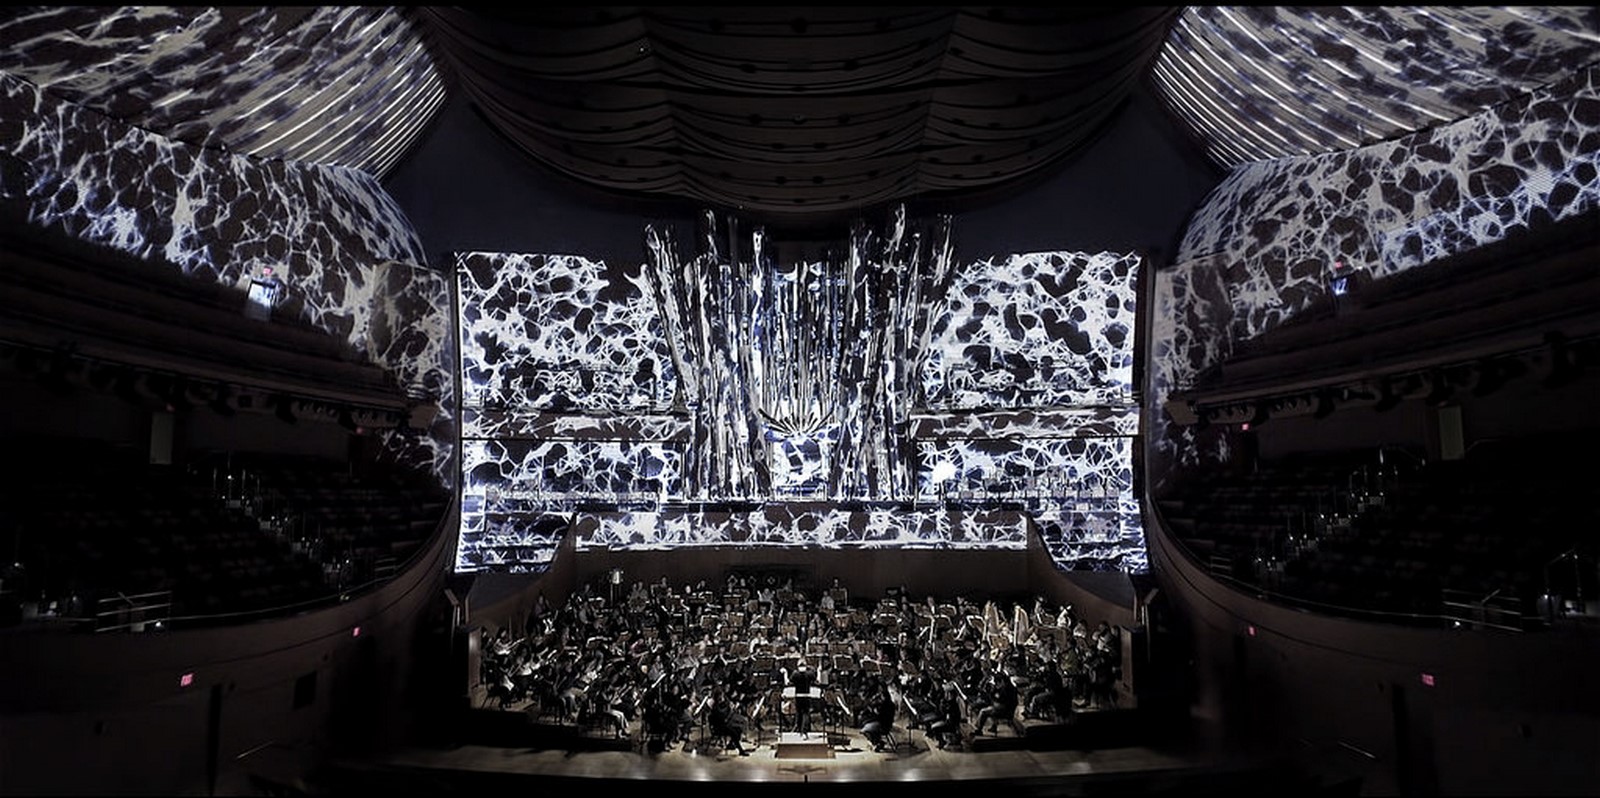 <i><span style="font-weight: 400;">Refik's data art sculpture in the interiors of the LA Philharmnic_©The New York Times</span></i>